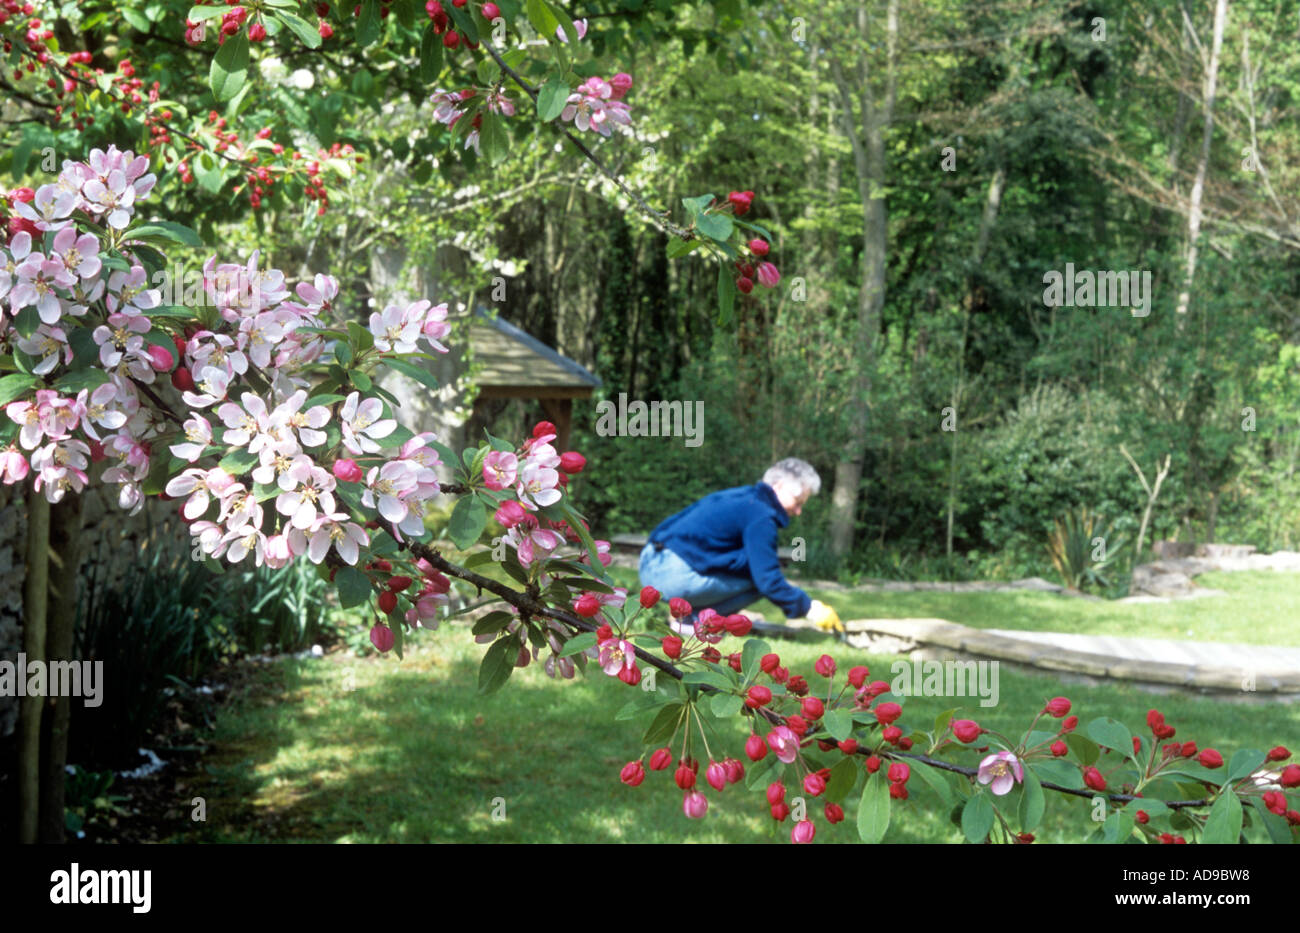 Woman gardening with blossom in foreground Stock Photo